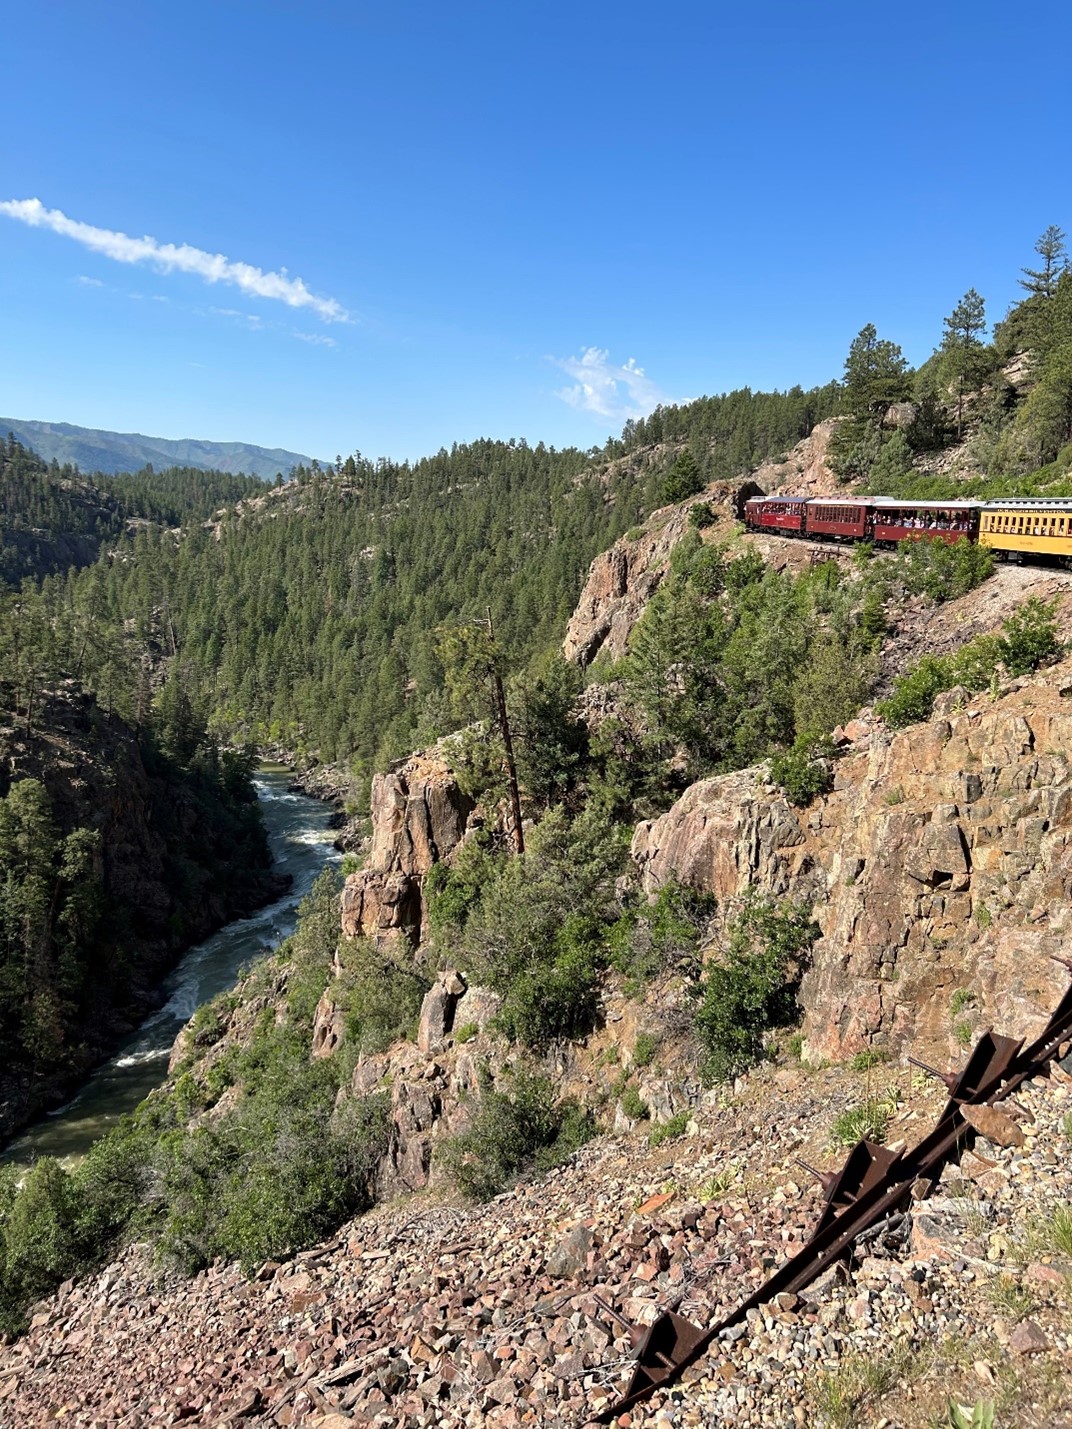 One of my favorite views from the Durango to Silverton train.